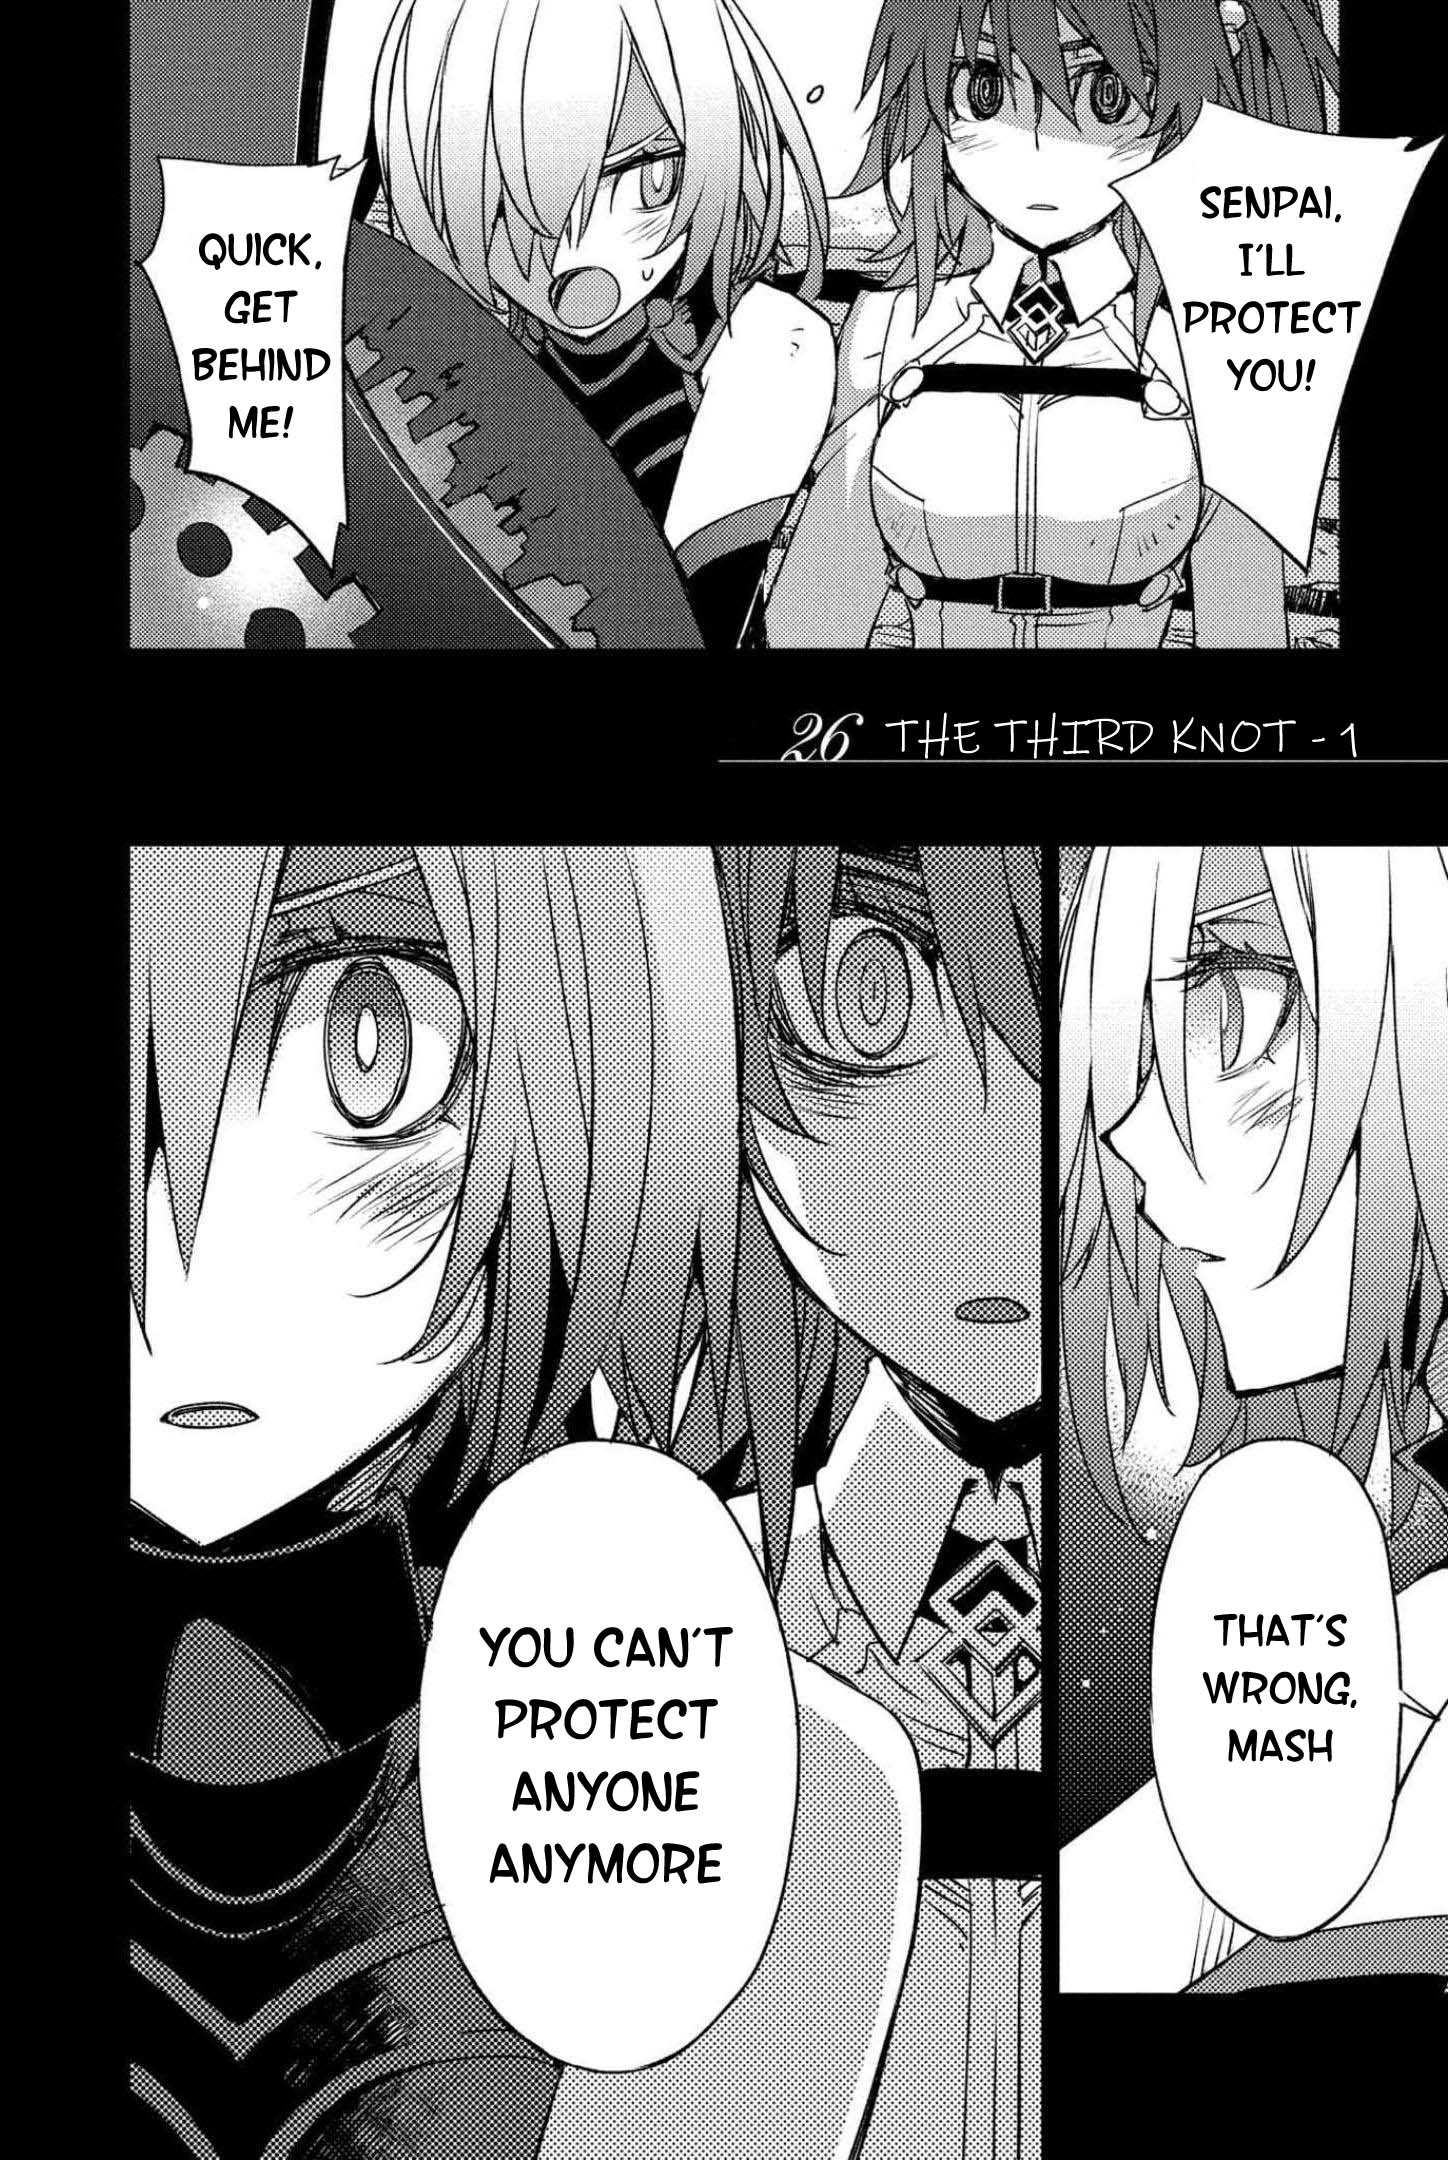 Fate/grand Order: Epic Of Remnant: Pseudo-Singularity Iv: The Forbidden Advent Garden, Salem - Heretical Salem Vol.4 Chapter 26: The Third Knot - 1 - Picture 2